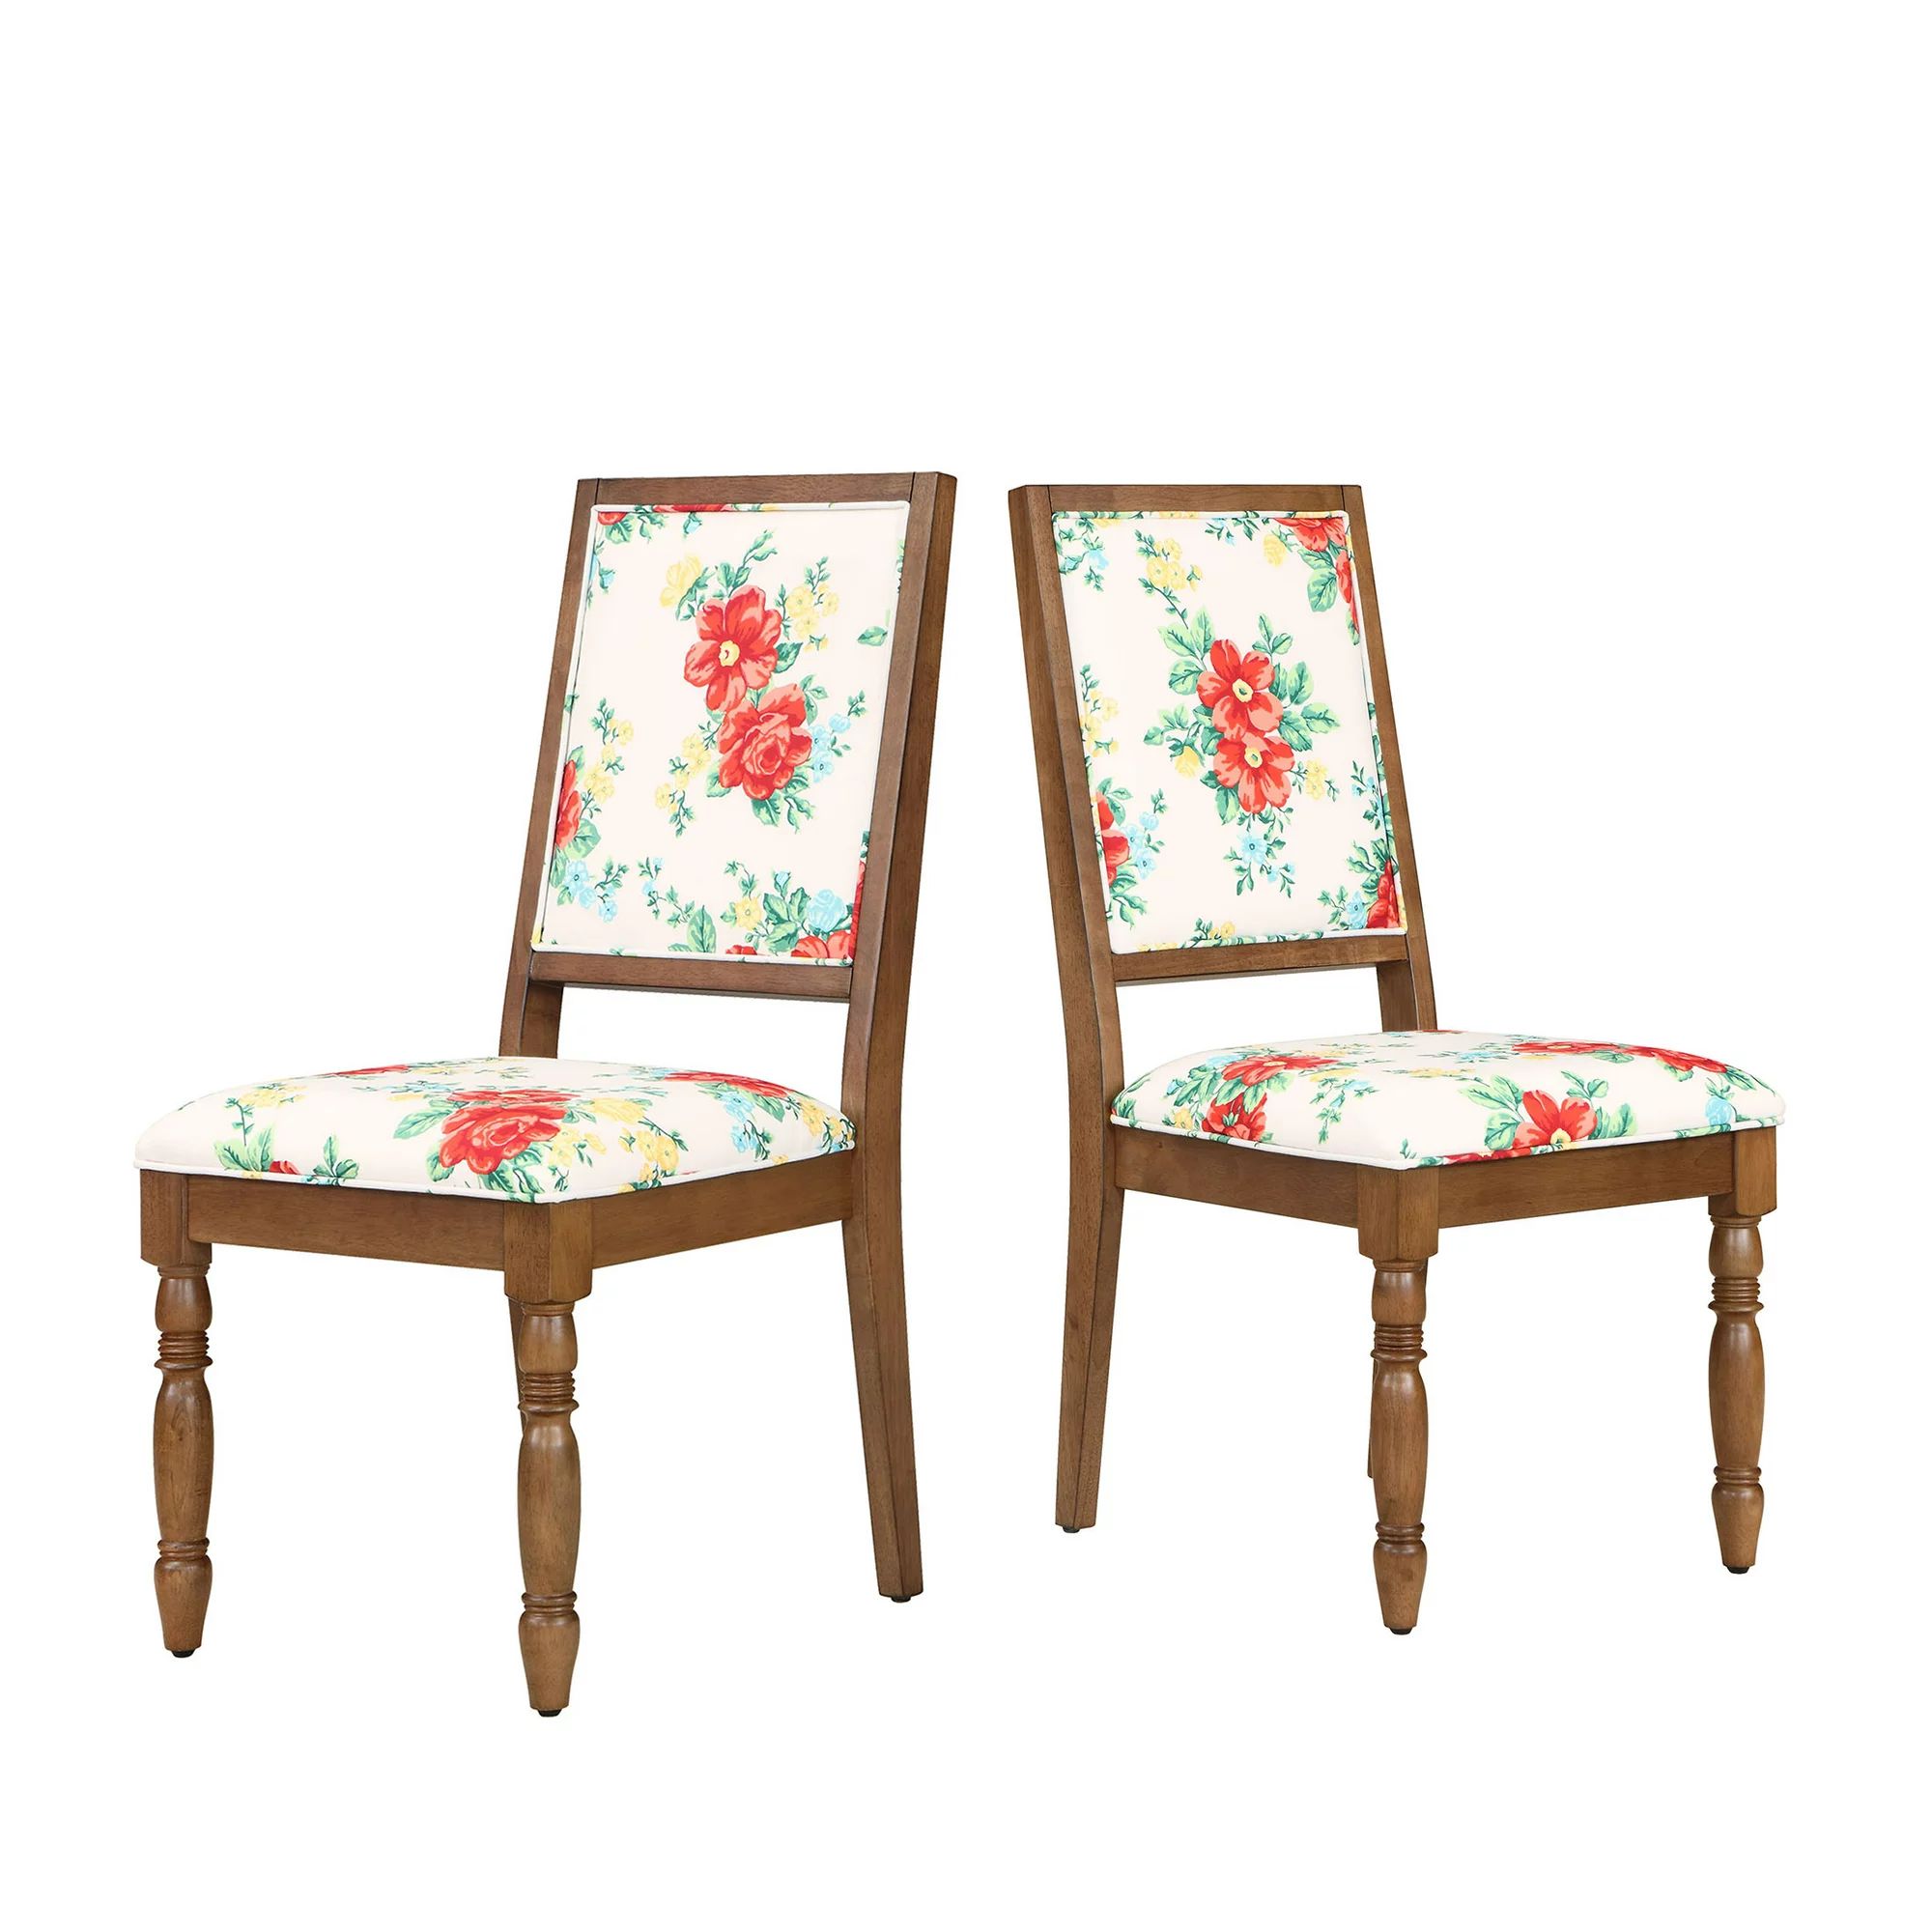 The Pioneer Woman Vintage Floral Dining Chairs, Set of 2 | Walmart (US)